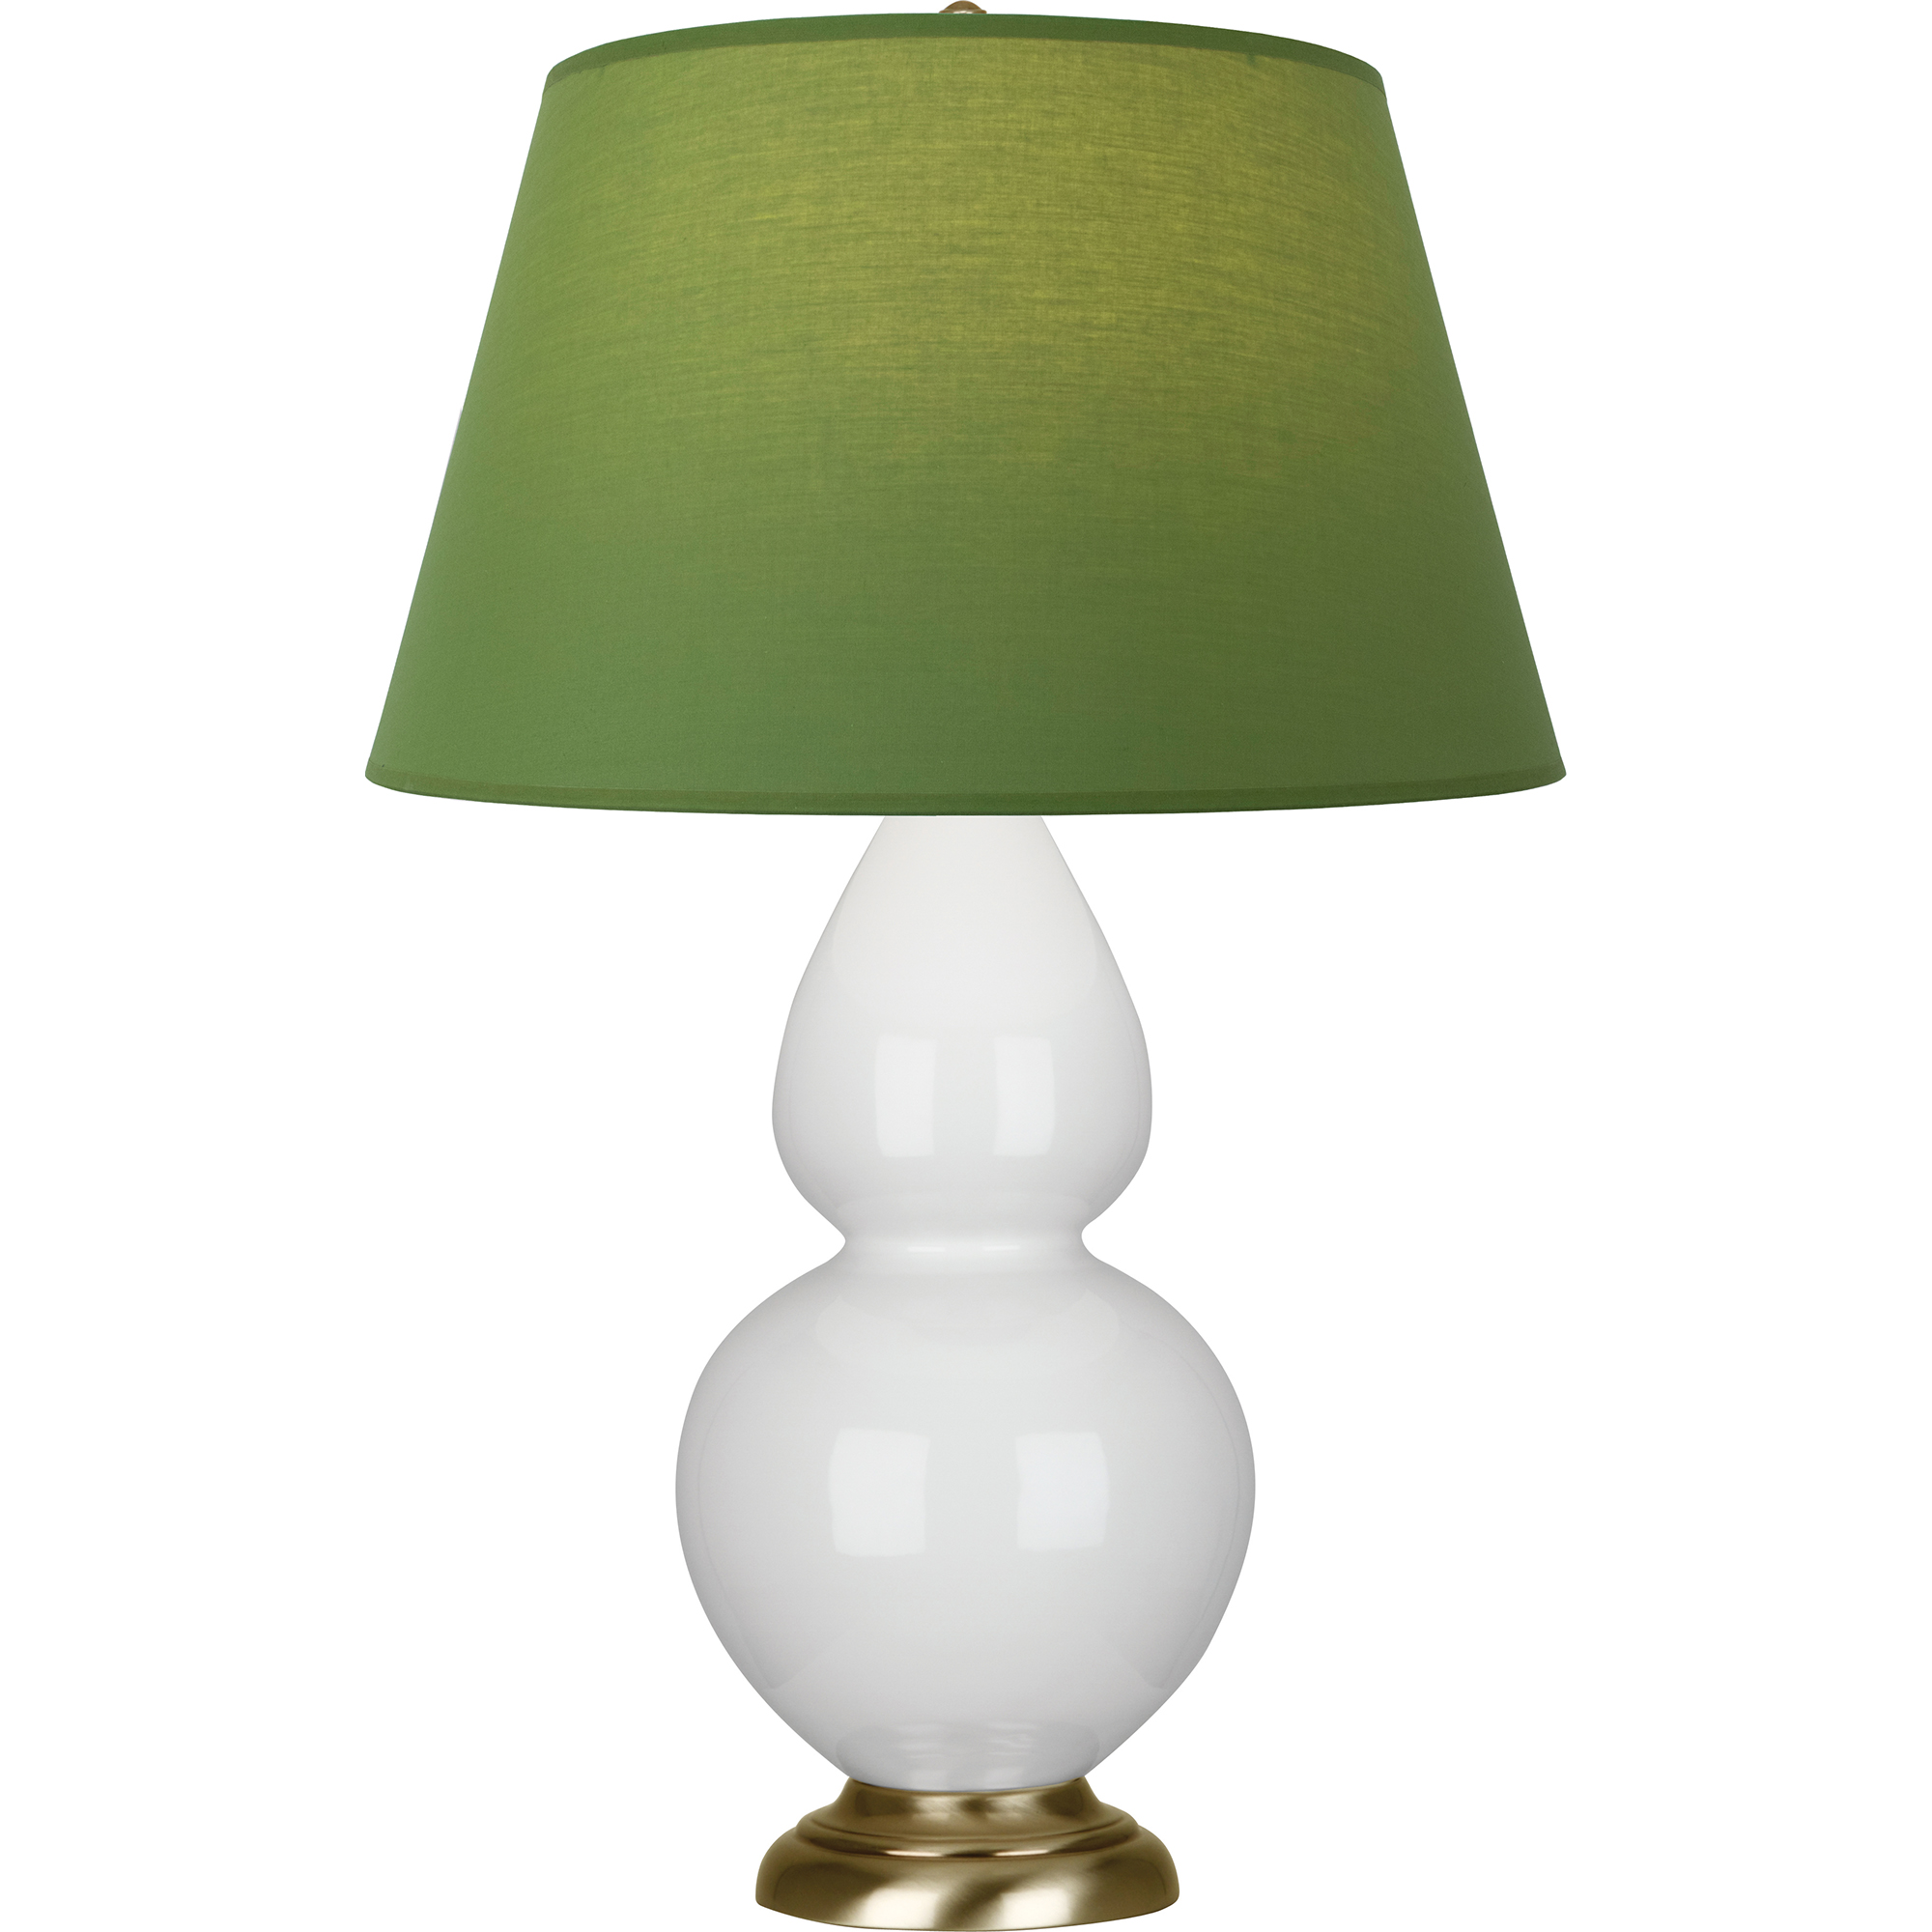 Double Gourd Table Lamp Style #1660G